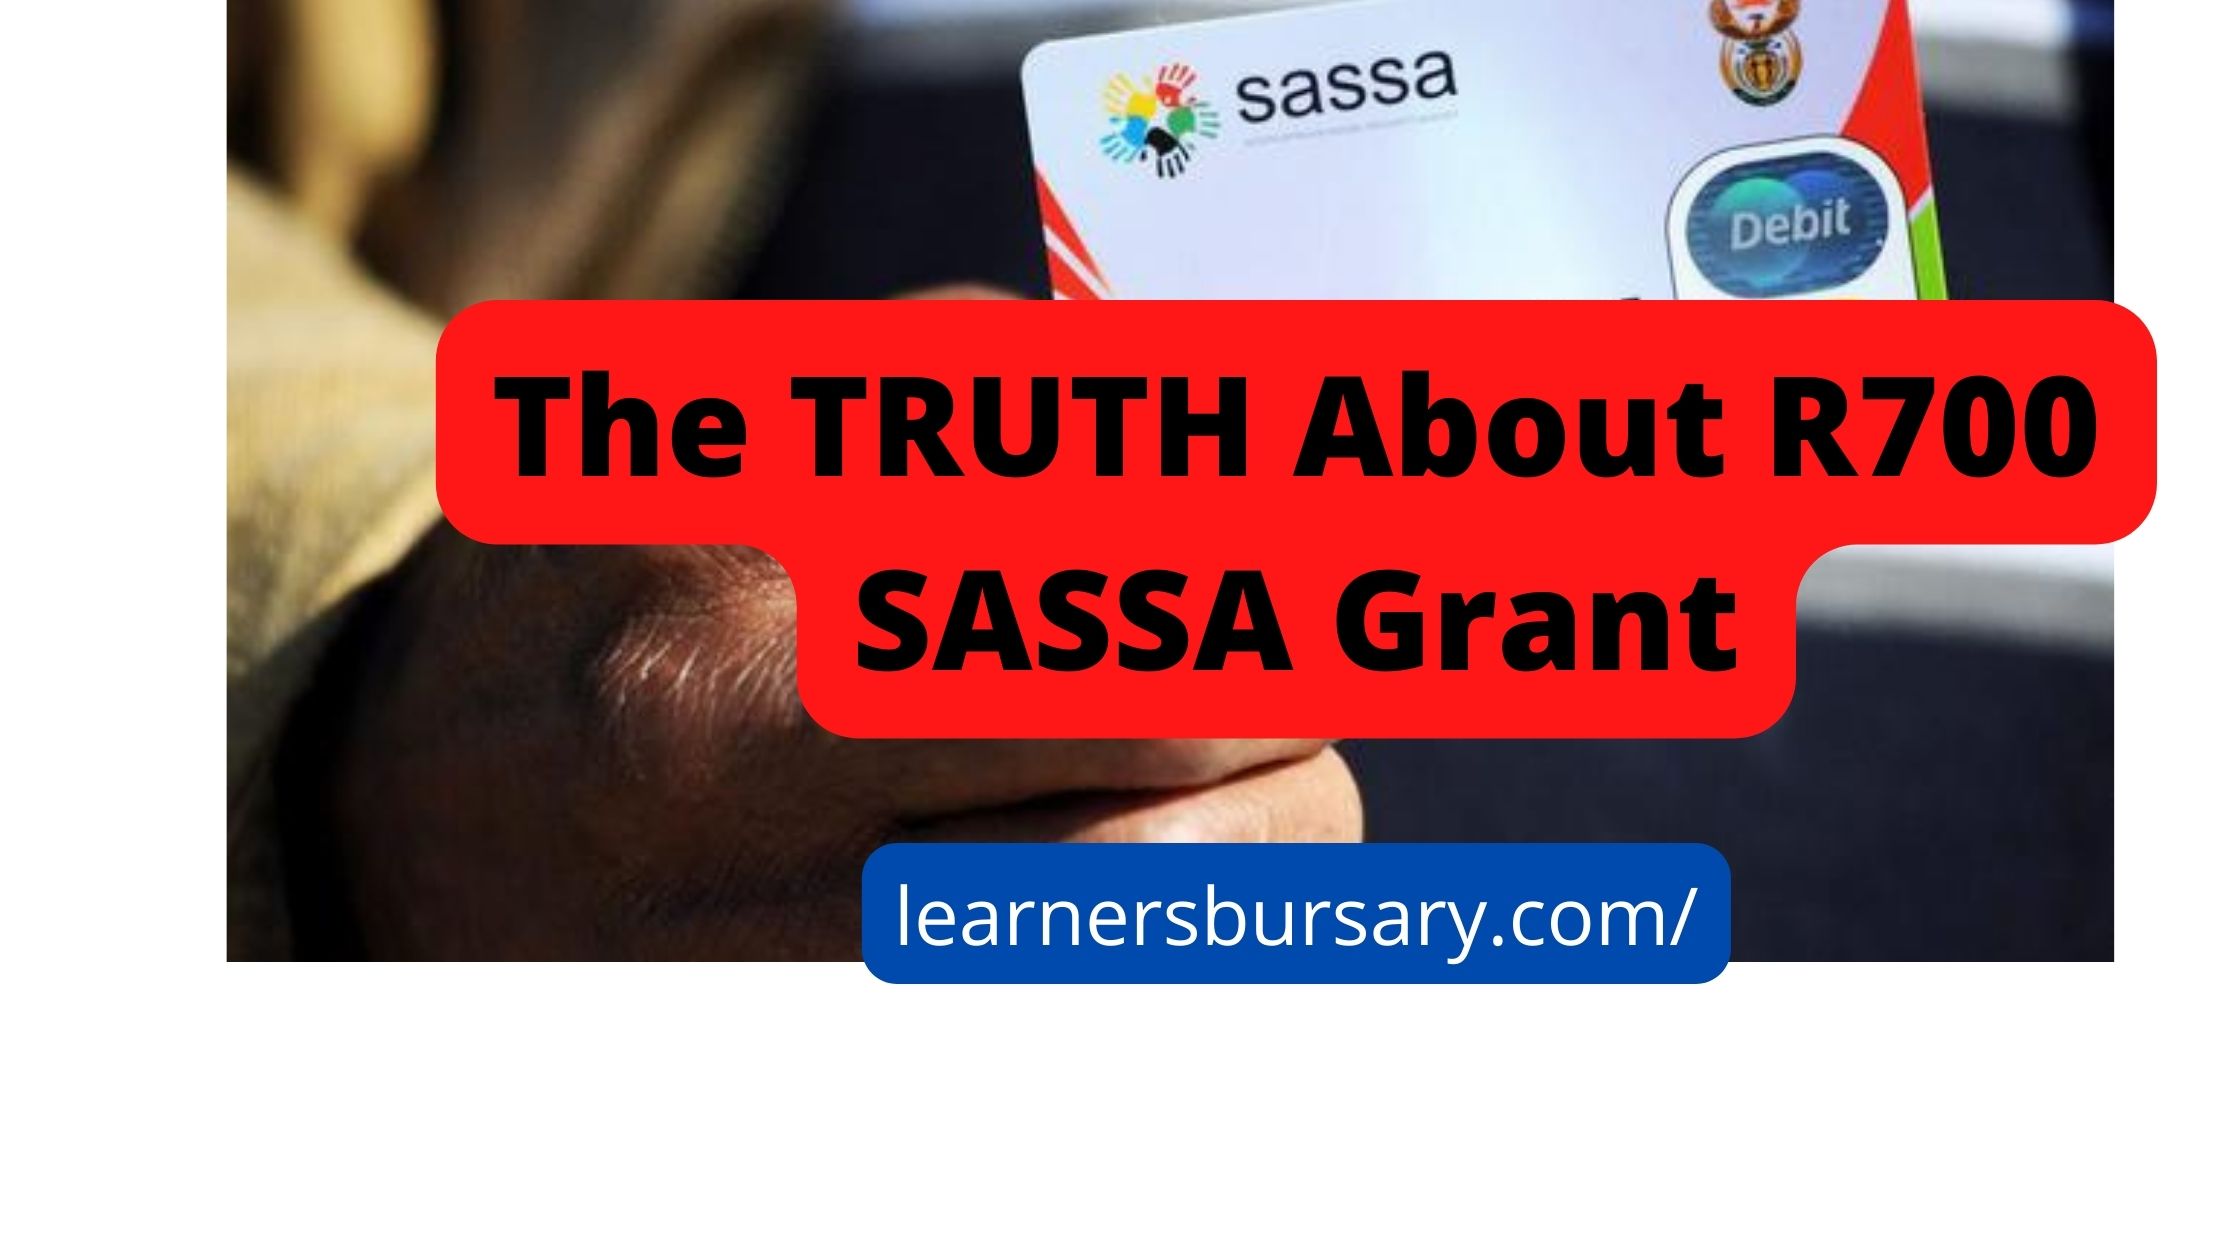 The TRUTH About R700 SASSA Grant